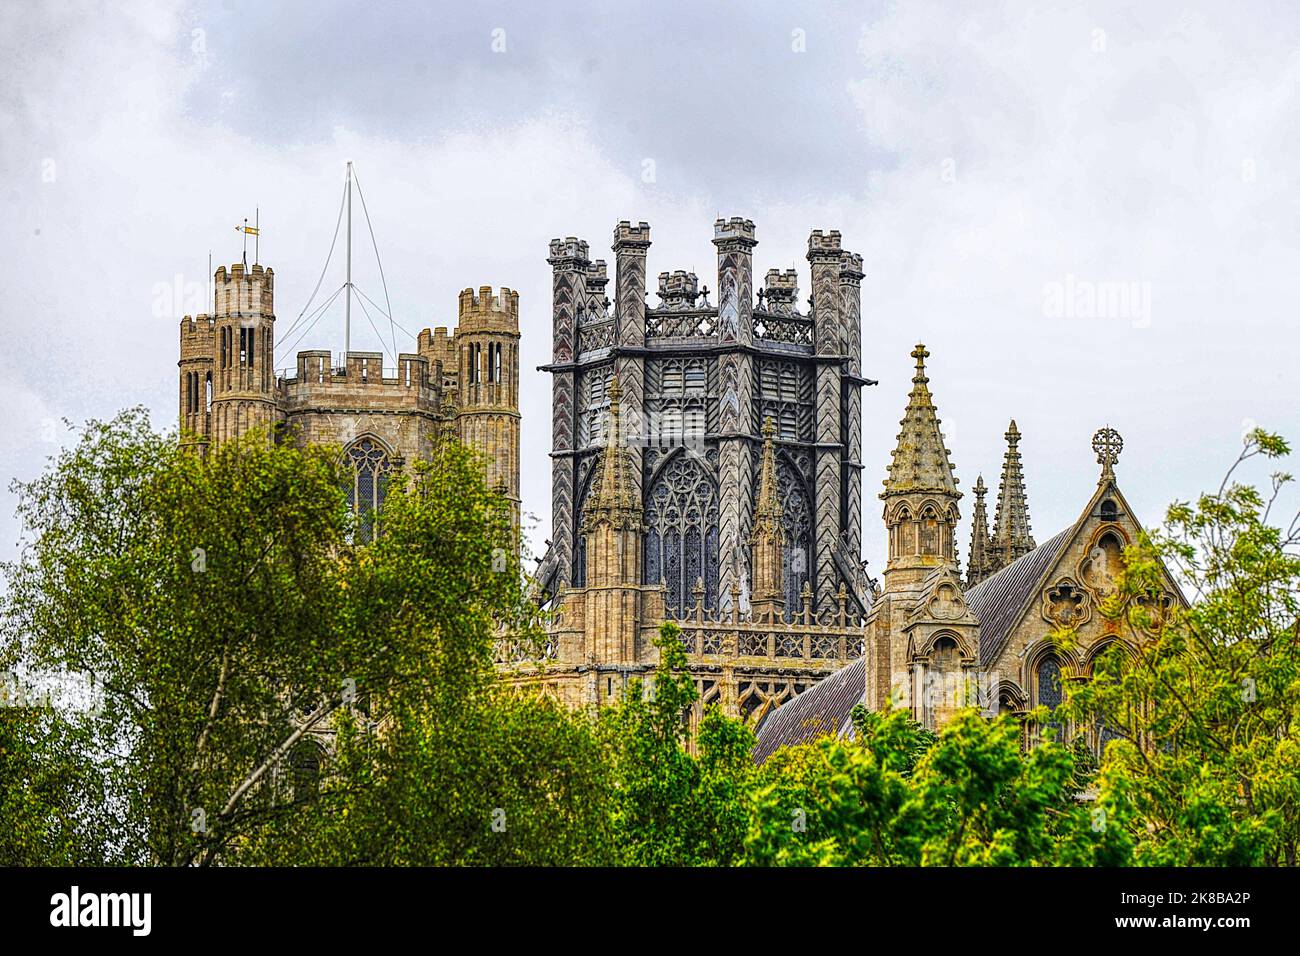 Ely Cathedral seen towering above the trees across the city Stock Photo